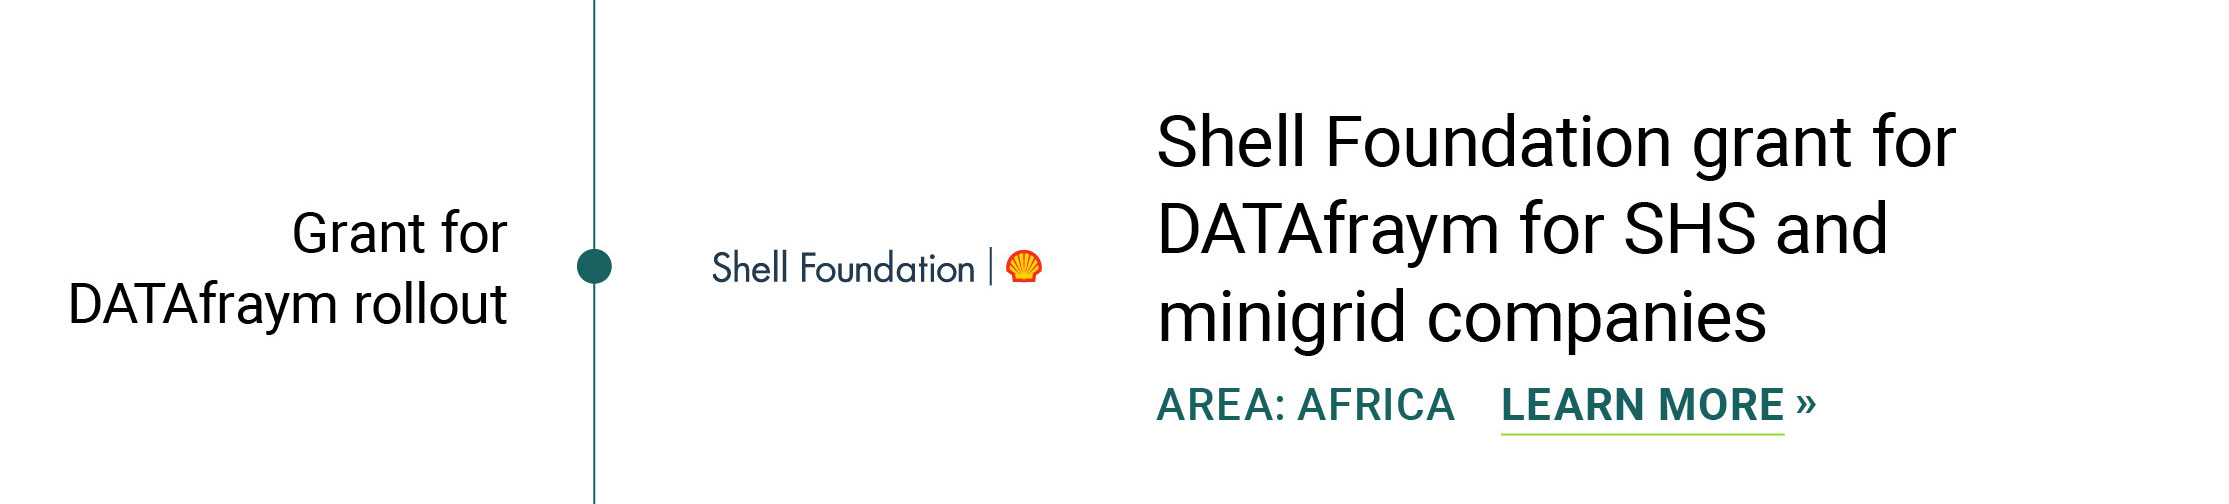 June 2019 Shell Foundation grant for DATAfraym for SHS and minigrid companies Shell Foundation Africa Shell Foundation grant for DATAfraym rollout to support energy access in Sub-saharan Africa